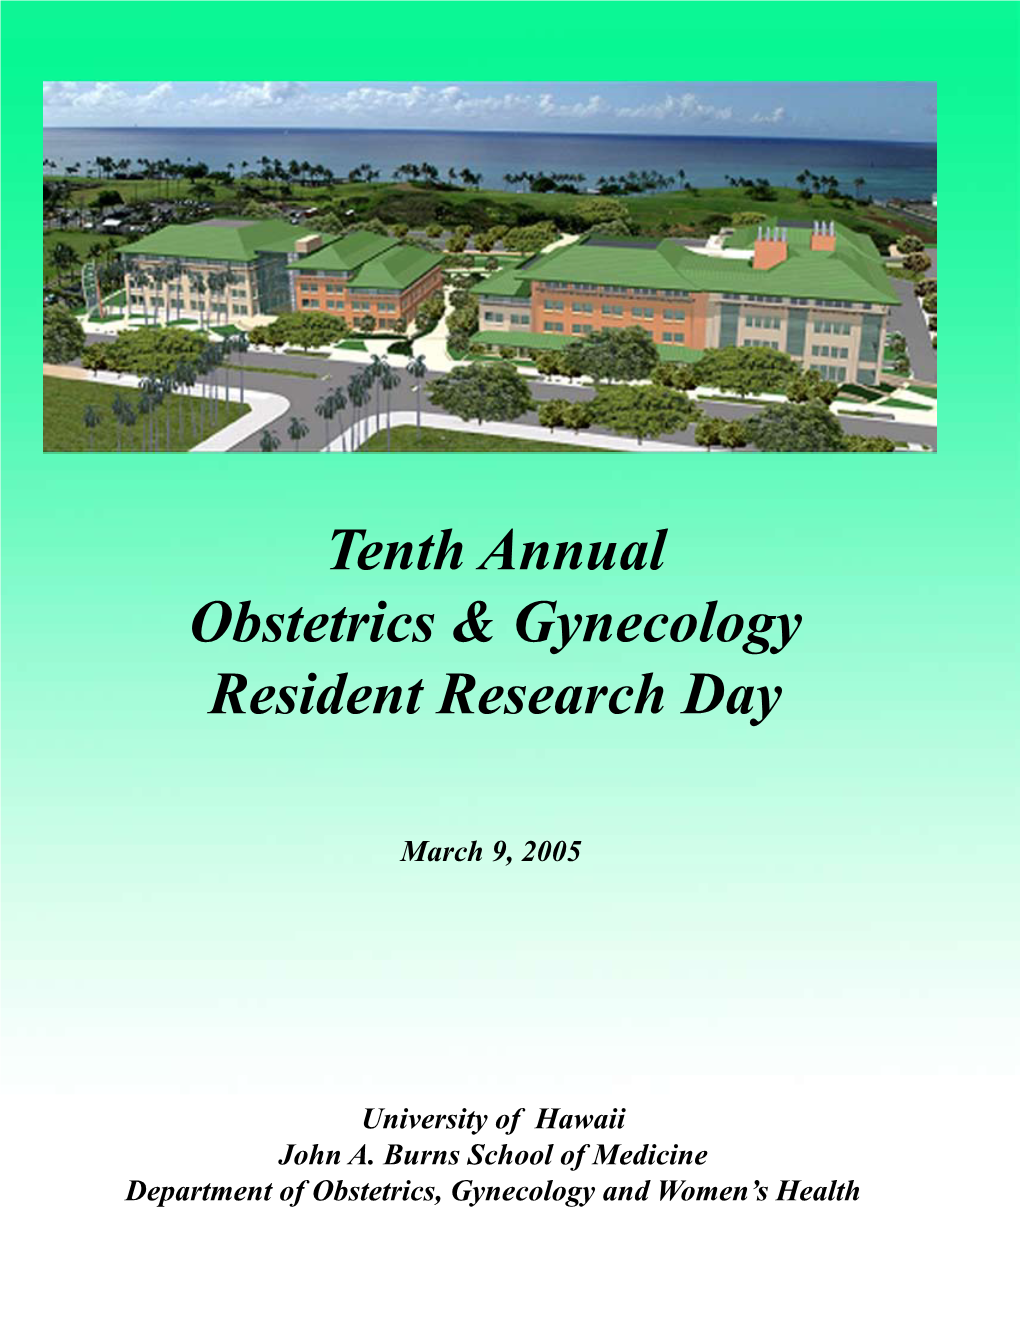 Tenth Annual Obstetrics & Gynecology Resident Research